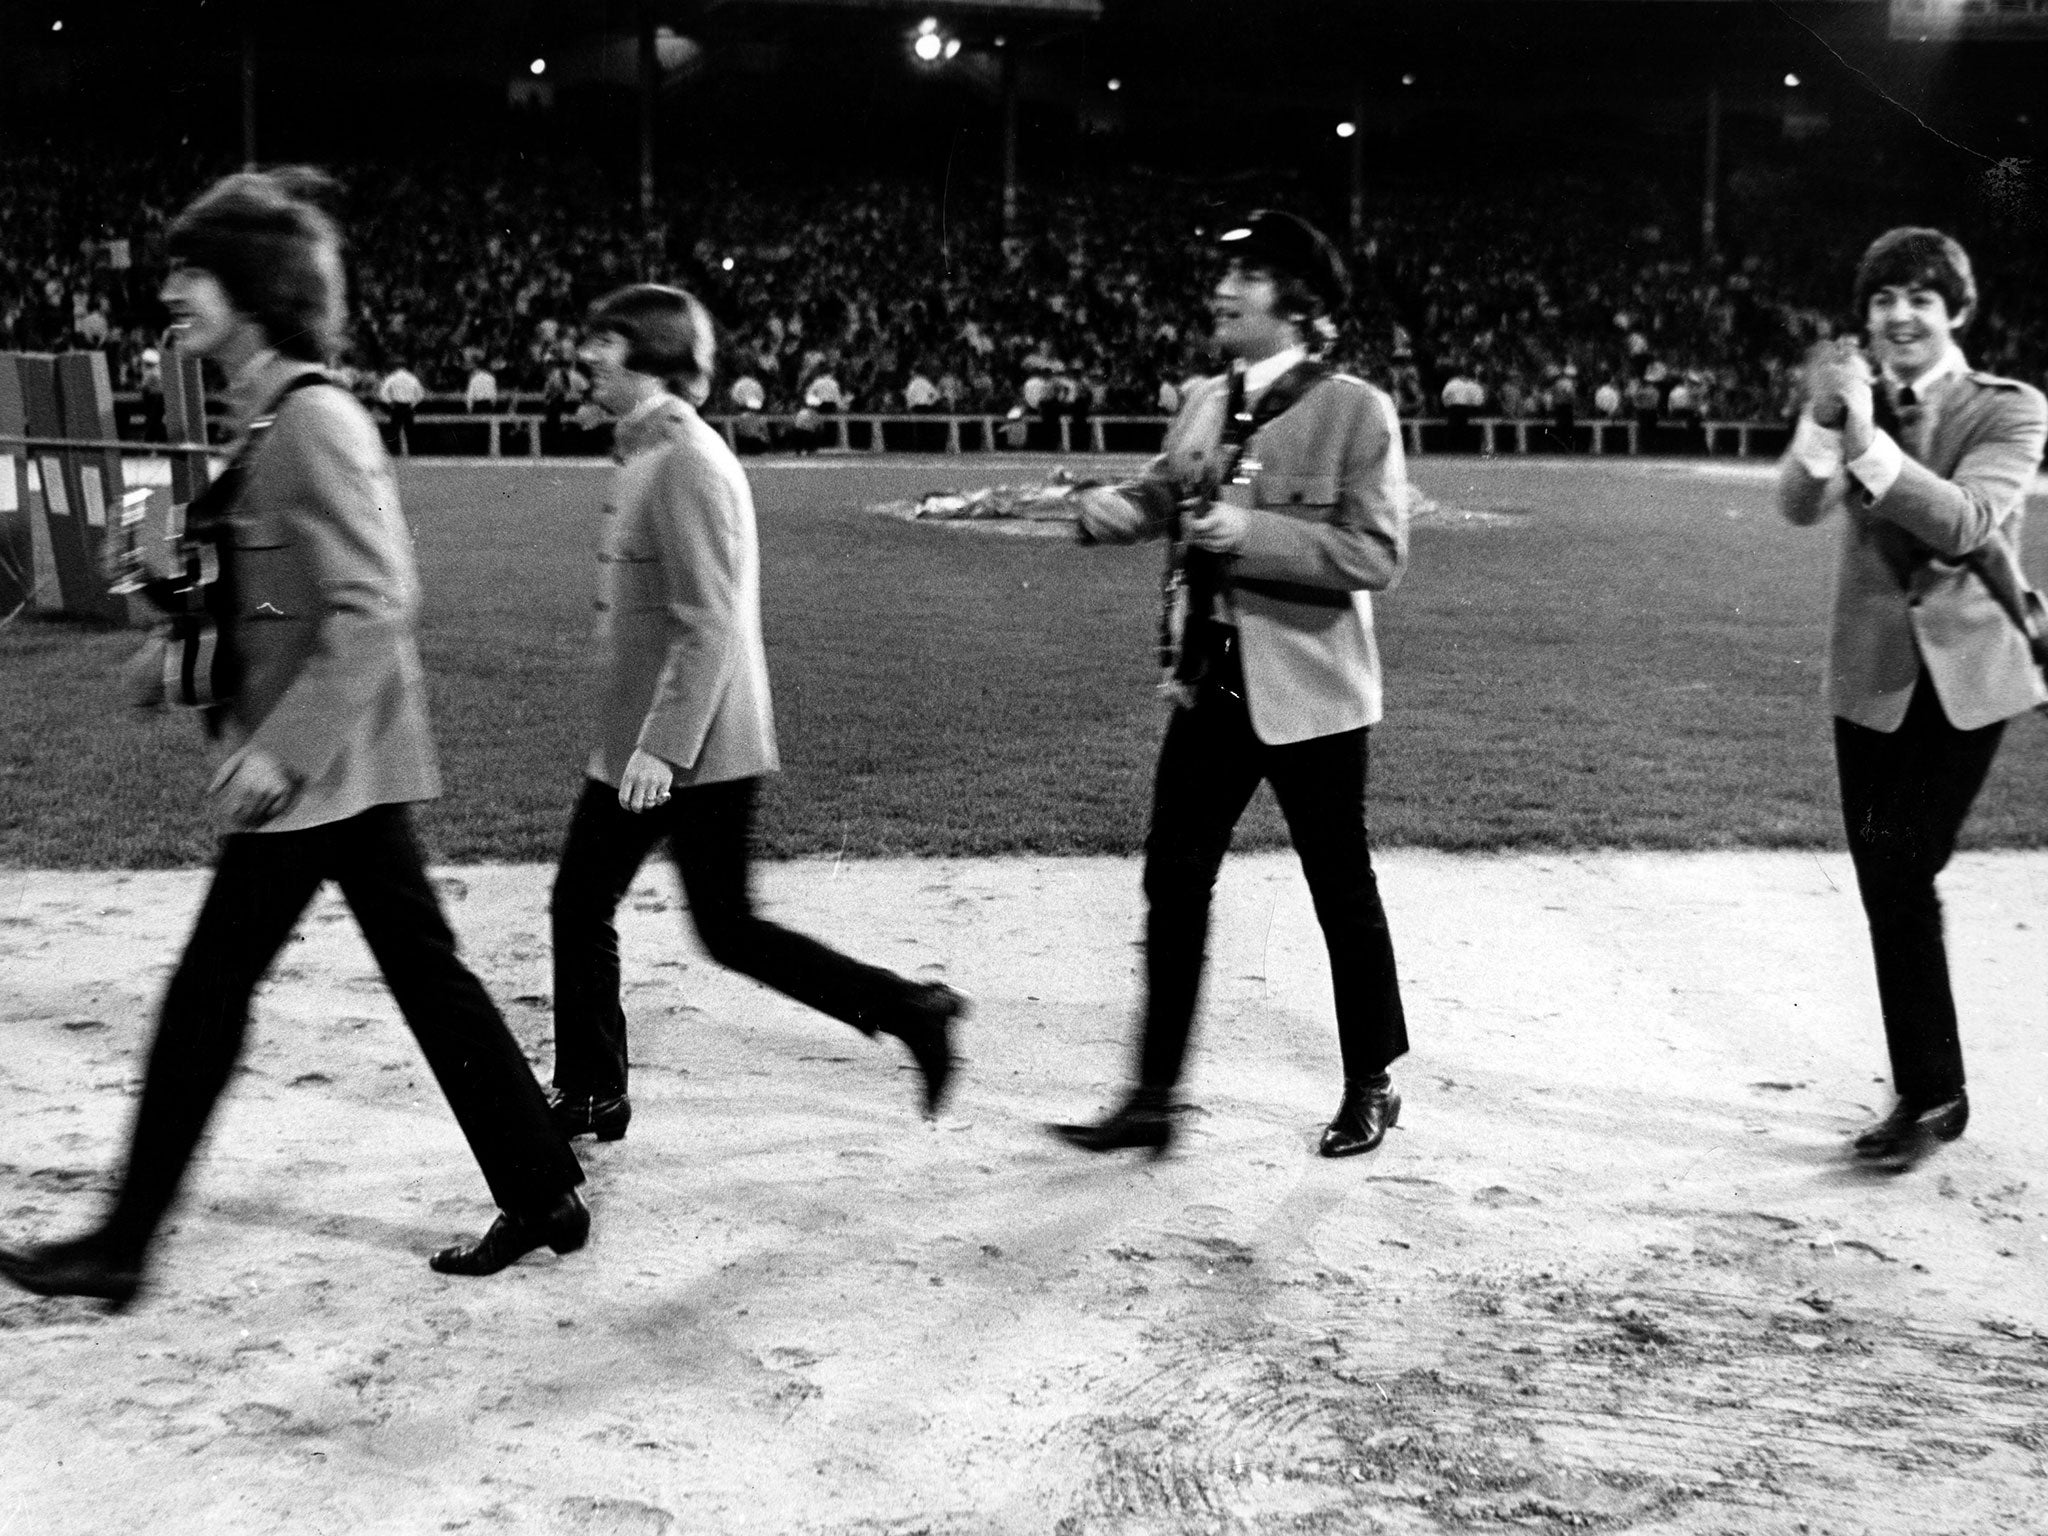 The Beatles on stage arriving at Shea Stadium